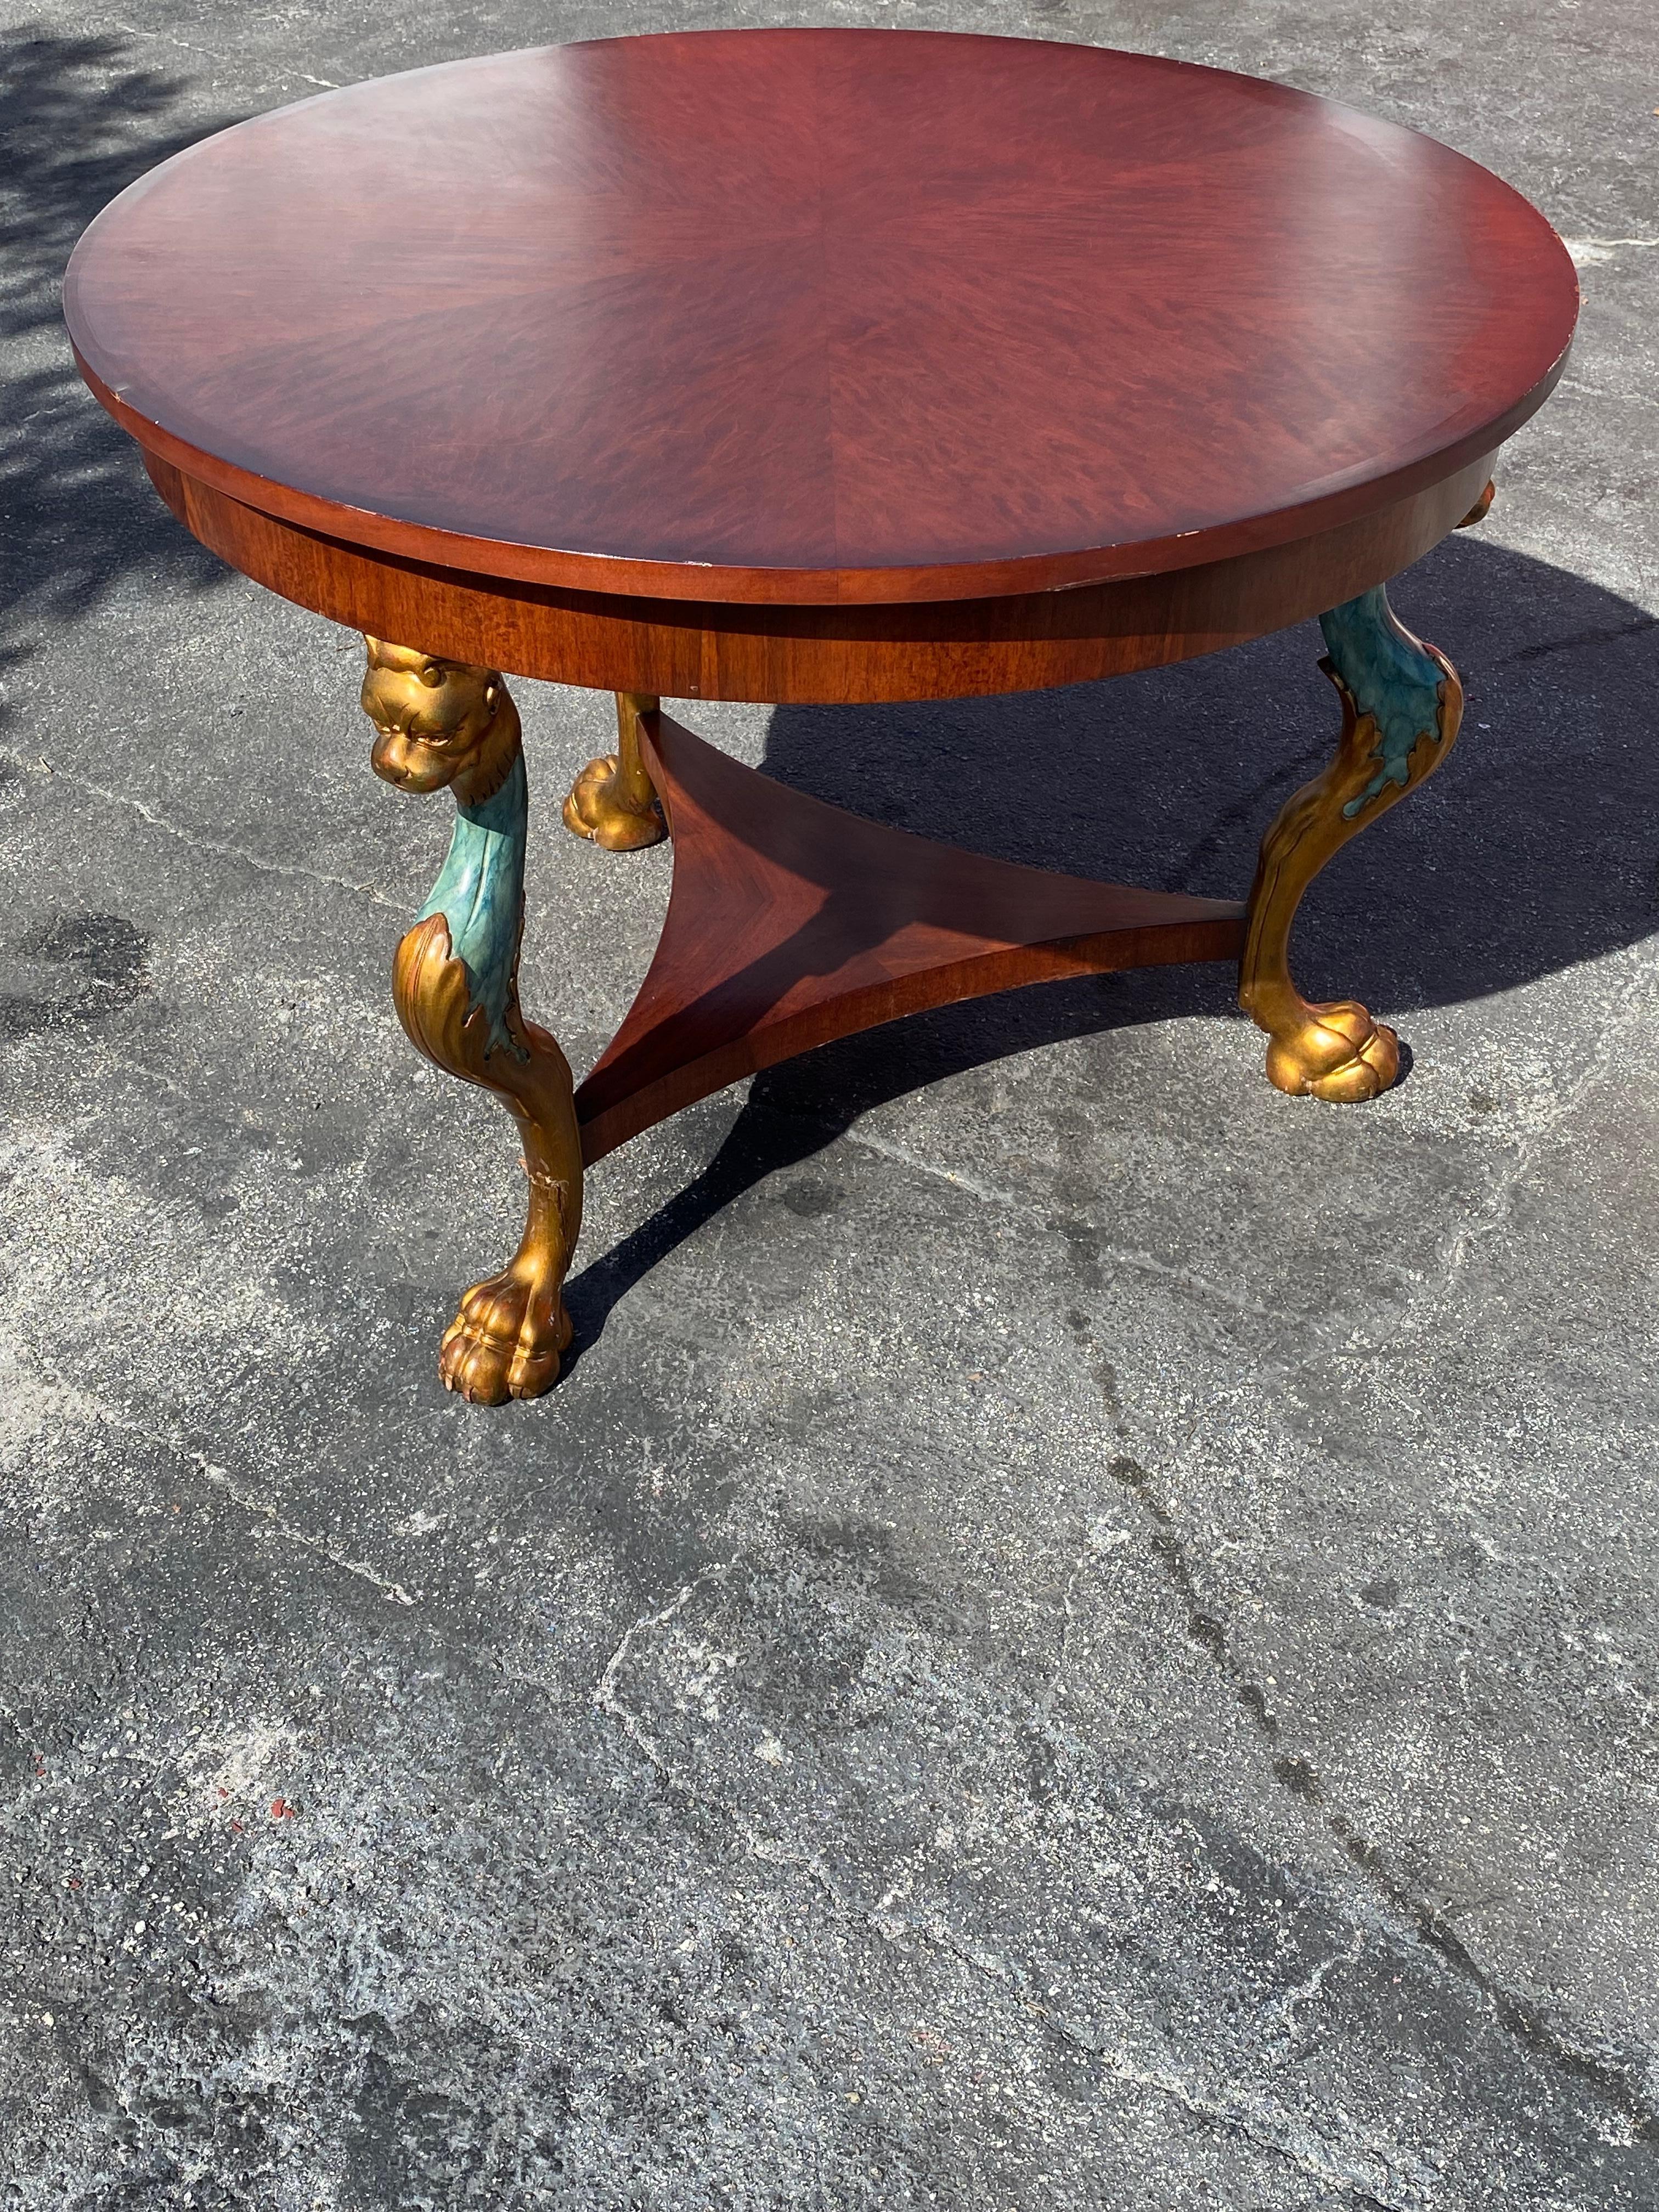 1980s Italian Round Tripod Empire Style Lion Carved Wood Center Dining Table In Good Condition For Sale In Fort Lauderdale, FL